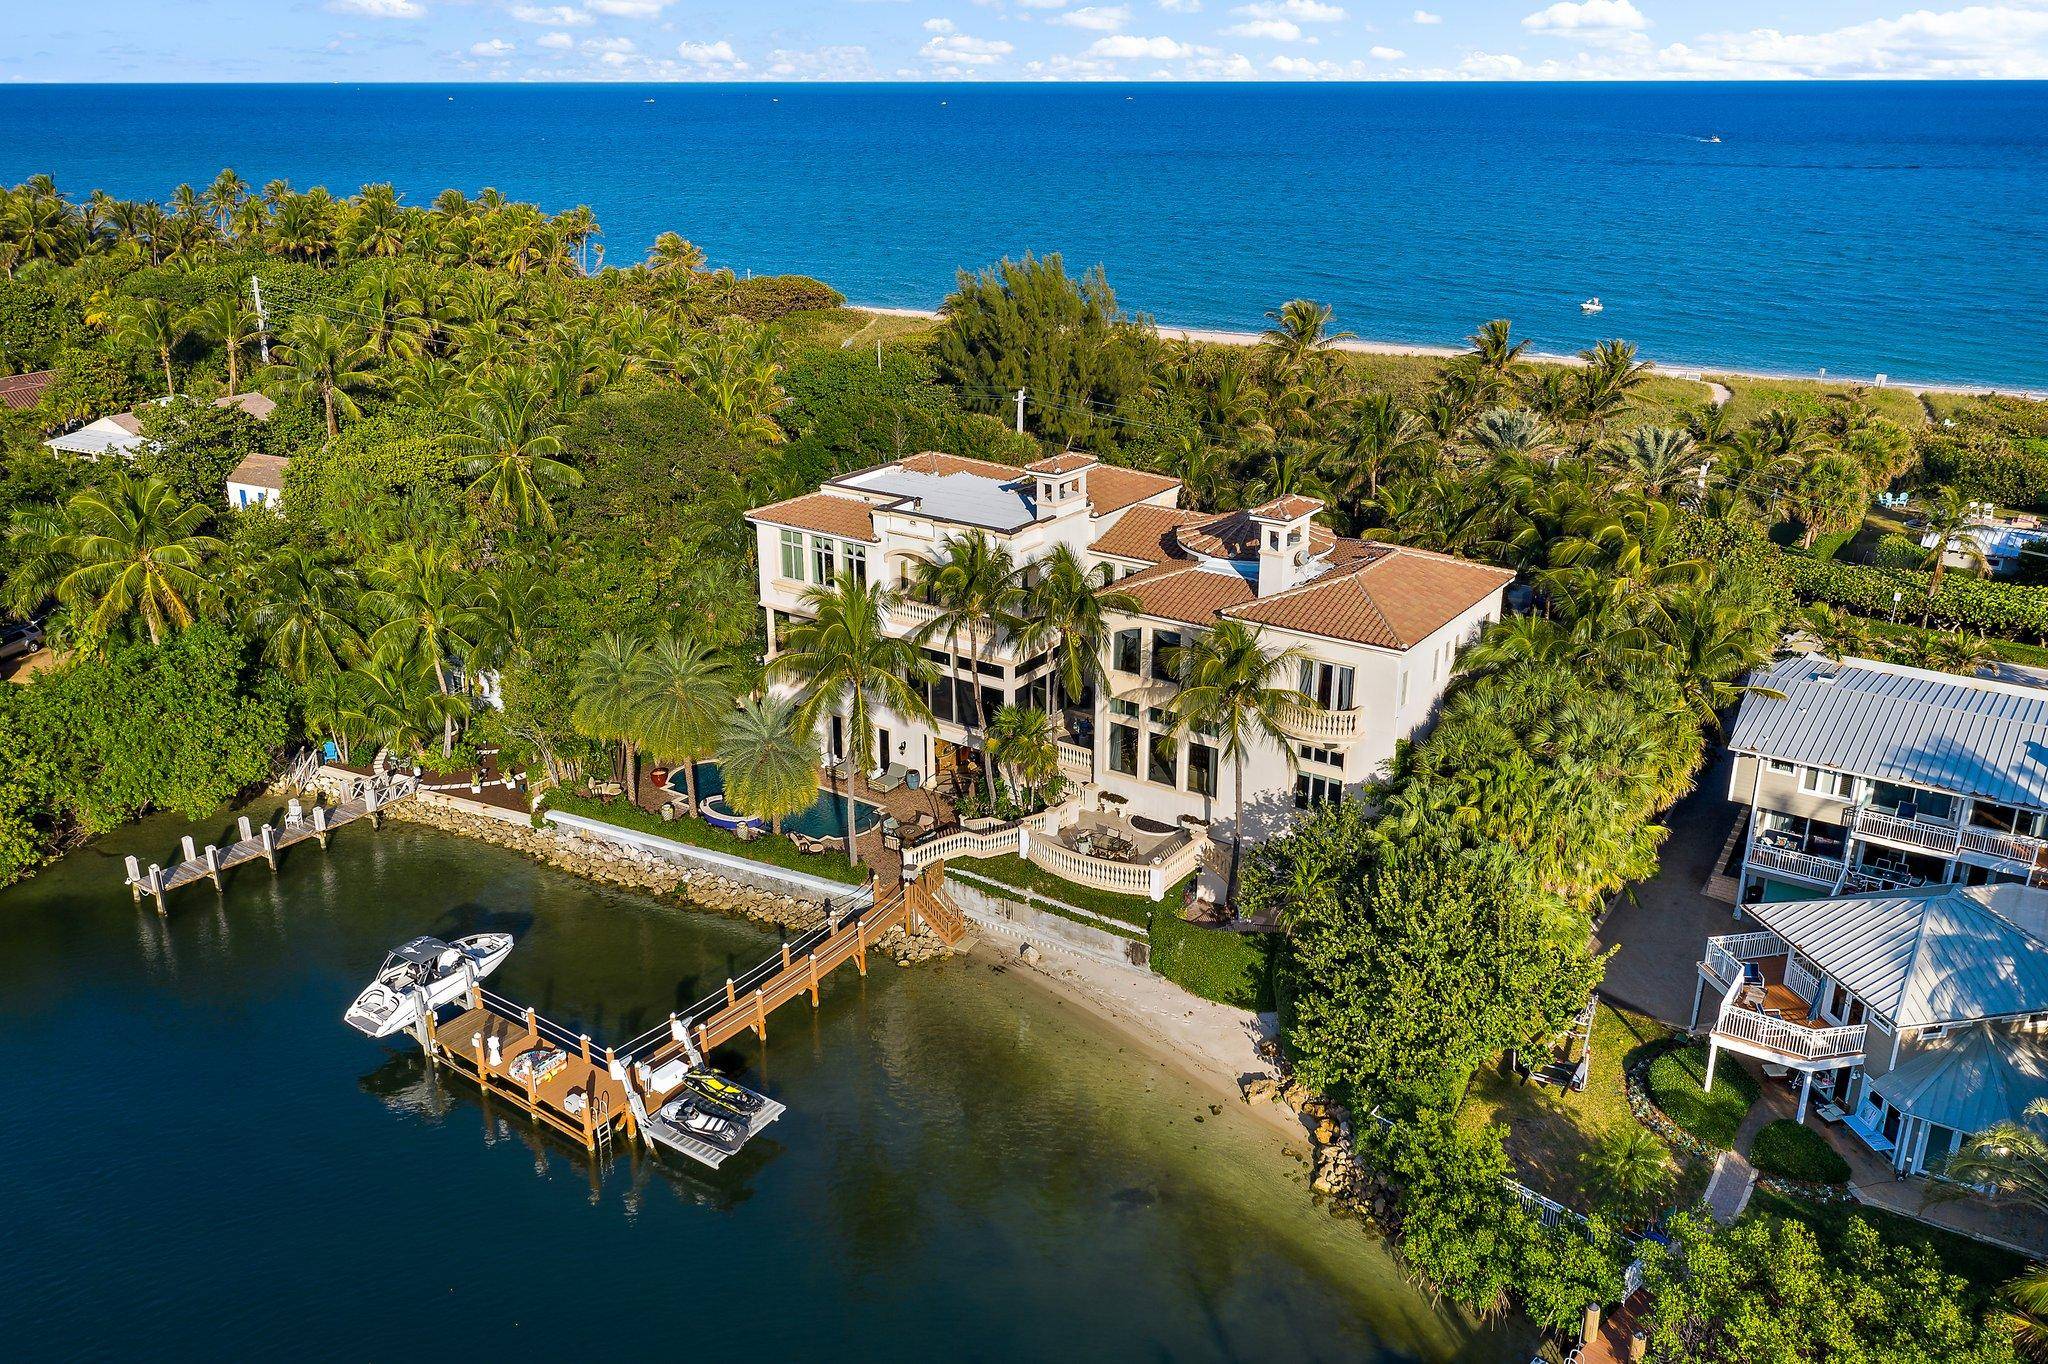 Spectacular intracoastal to ocean fully furnished custom estate available for summer rental.